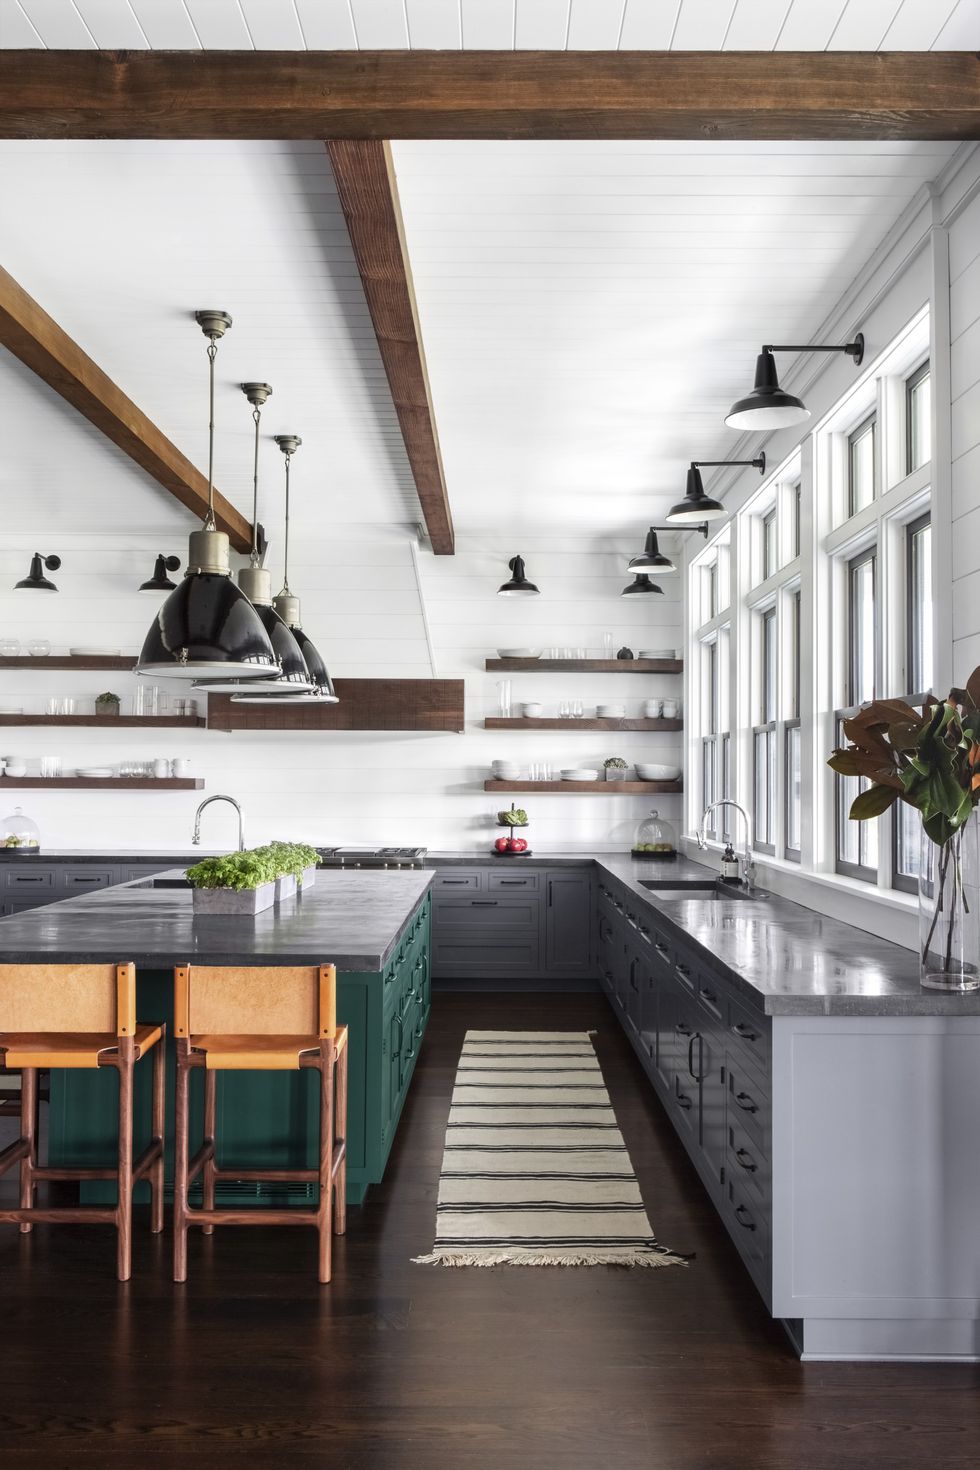 large forest green island in rustic modern kitchen with wood stools for seating, dark gray stone counters, white walls